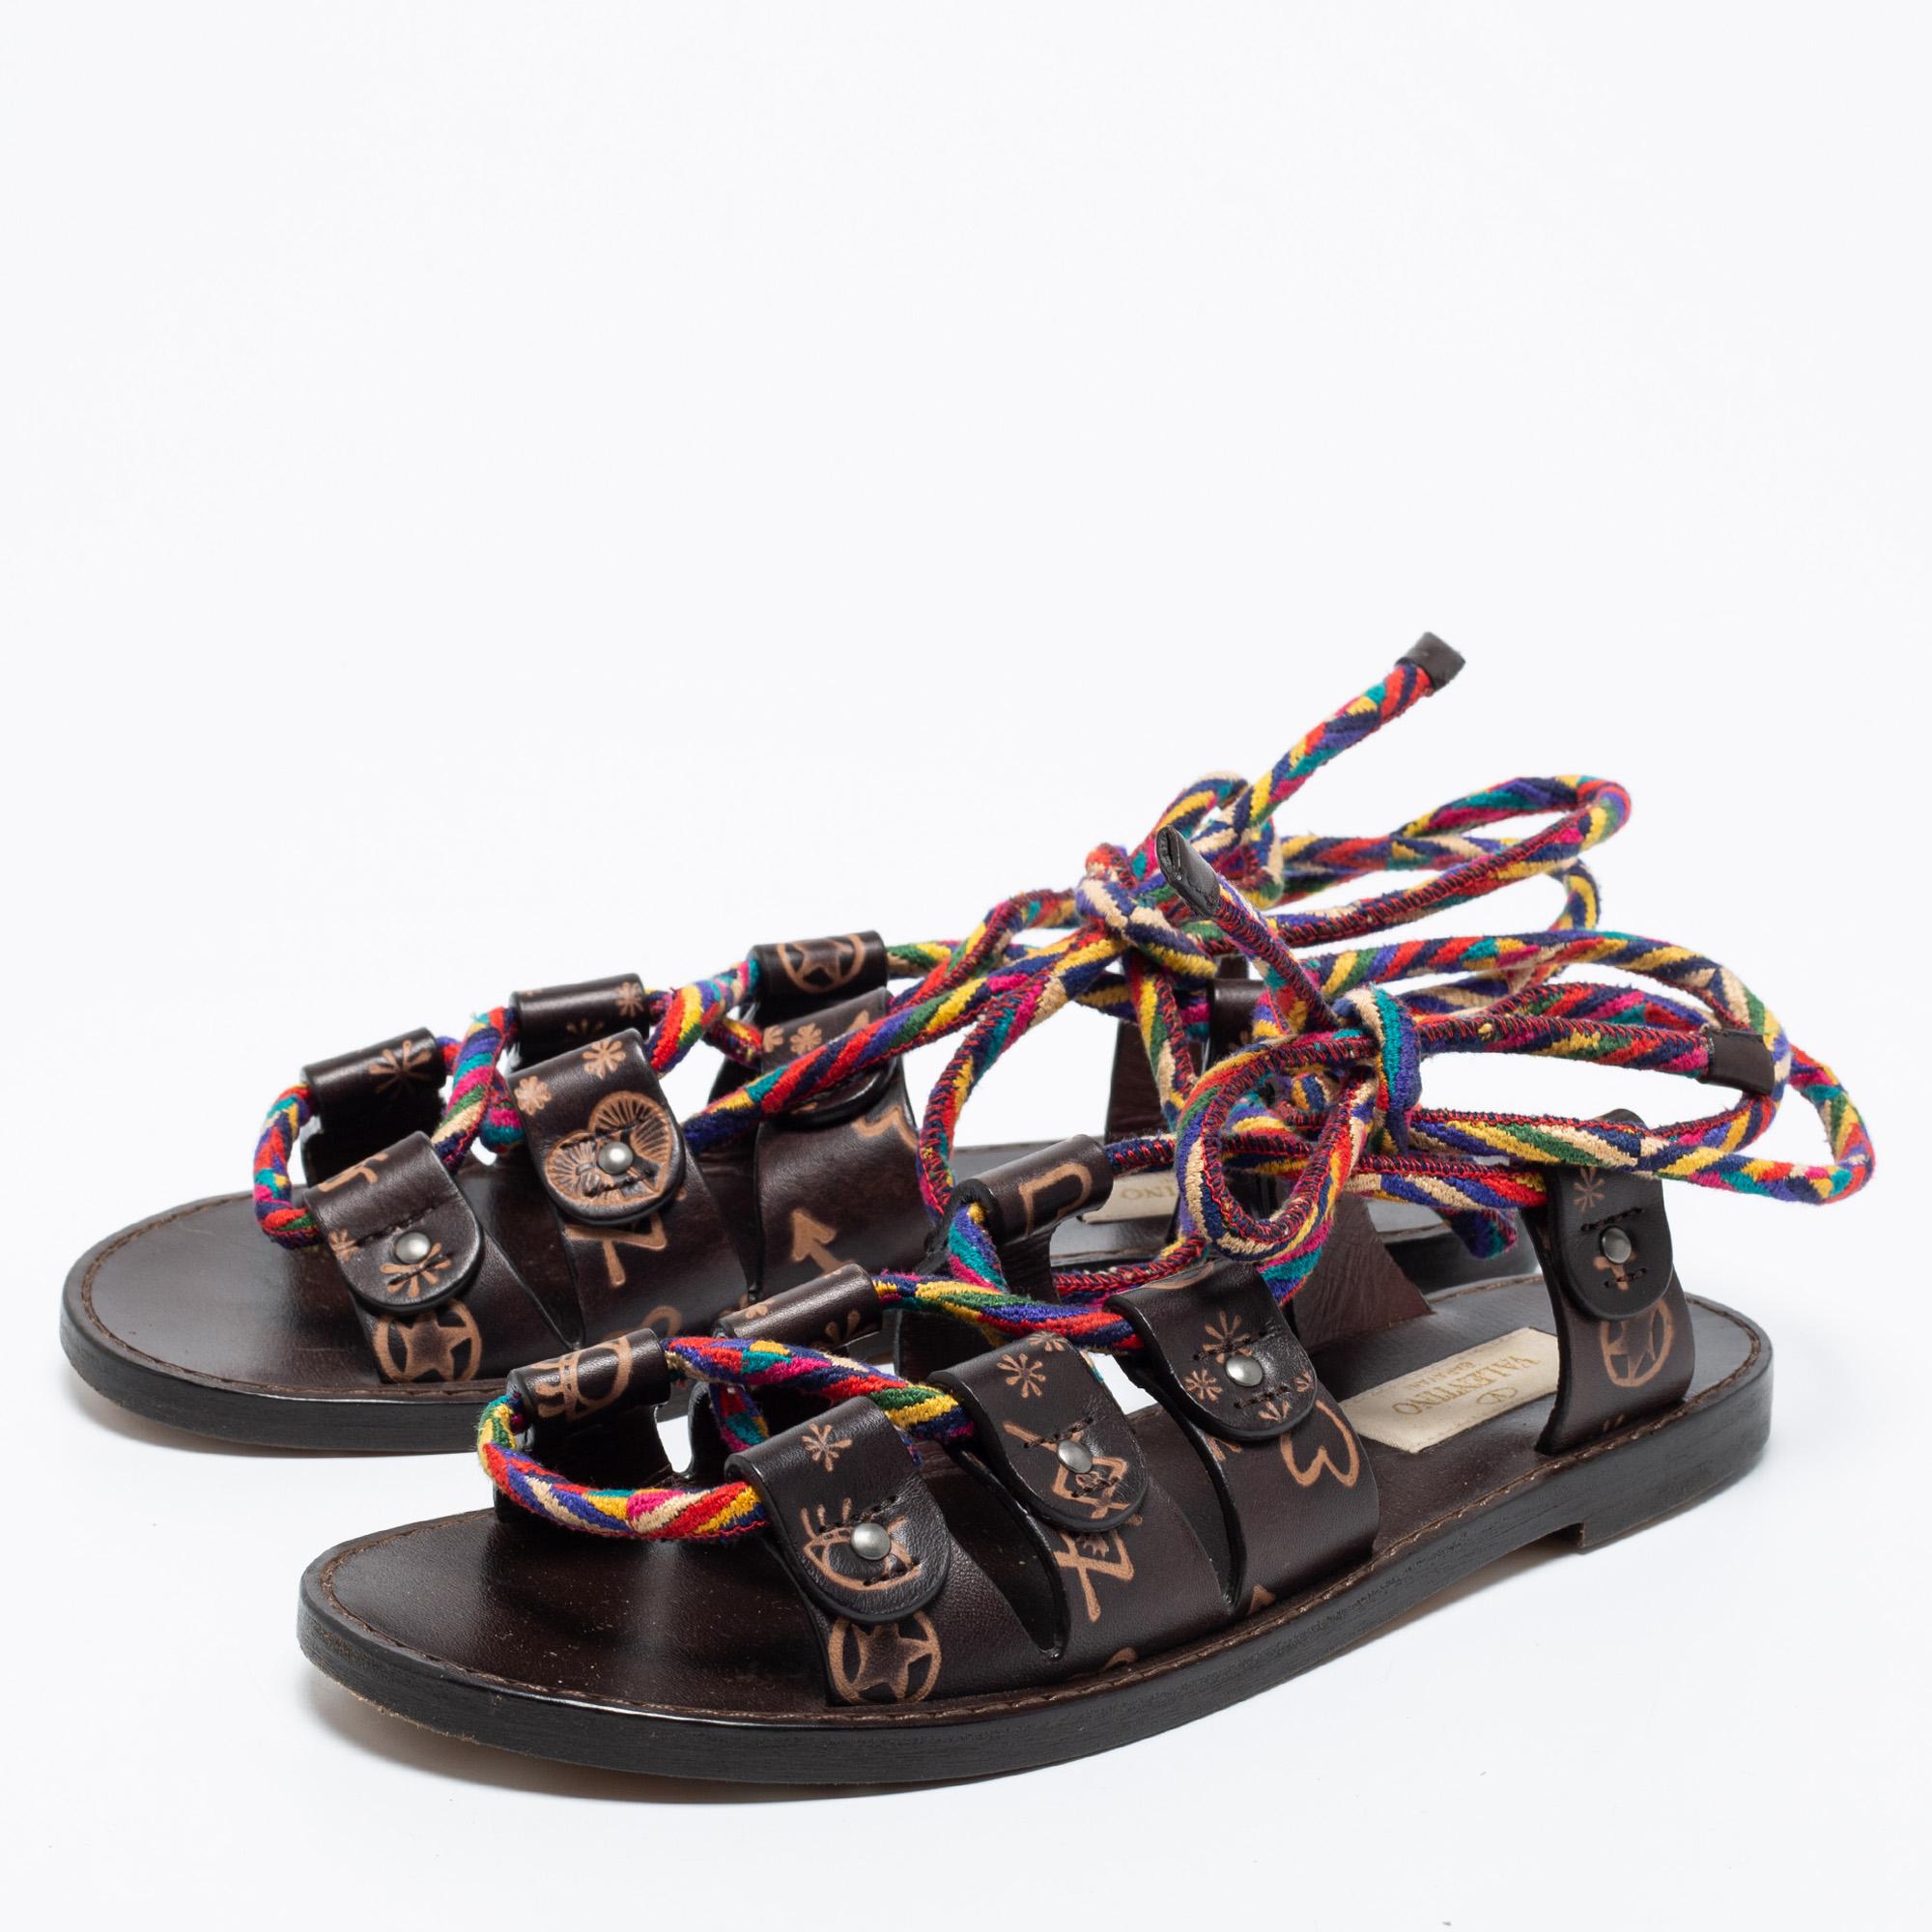 These exquisite gladiator sandals come from the house of Valentino. Crafted in Italy, they are made from quality leather and come in a brown hue. They exude style and playfulness and will make sure you are the center of attention wherever you go.

